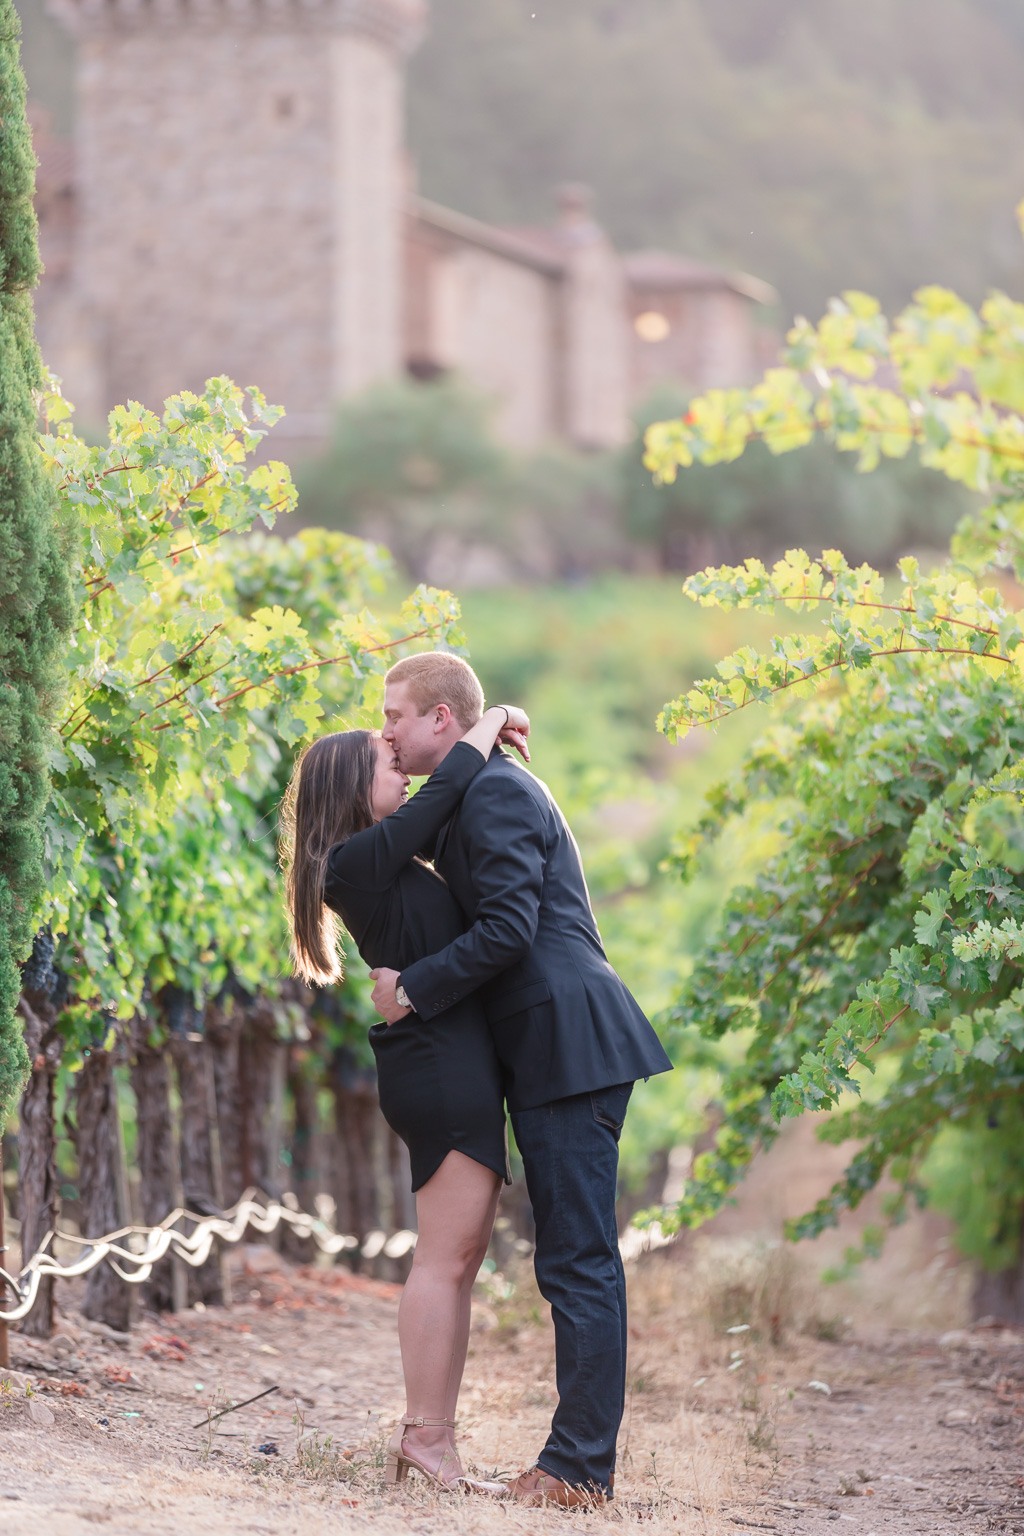 grand Napa castle winery makes the perfect backdrop for a surprise engagement